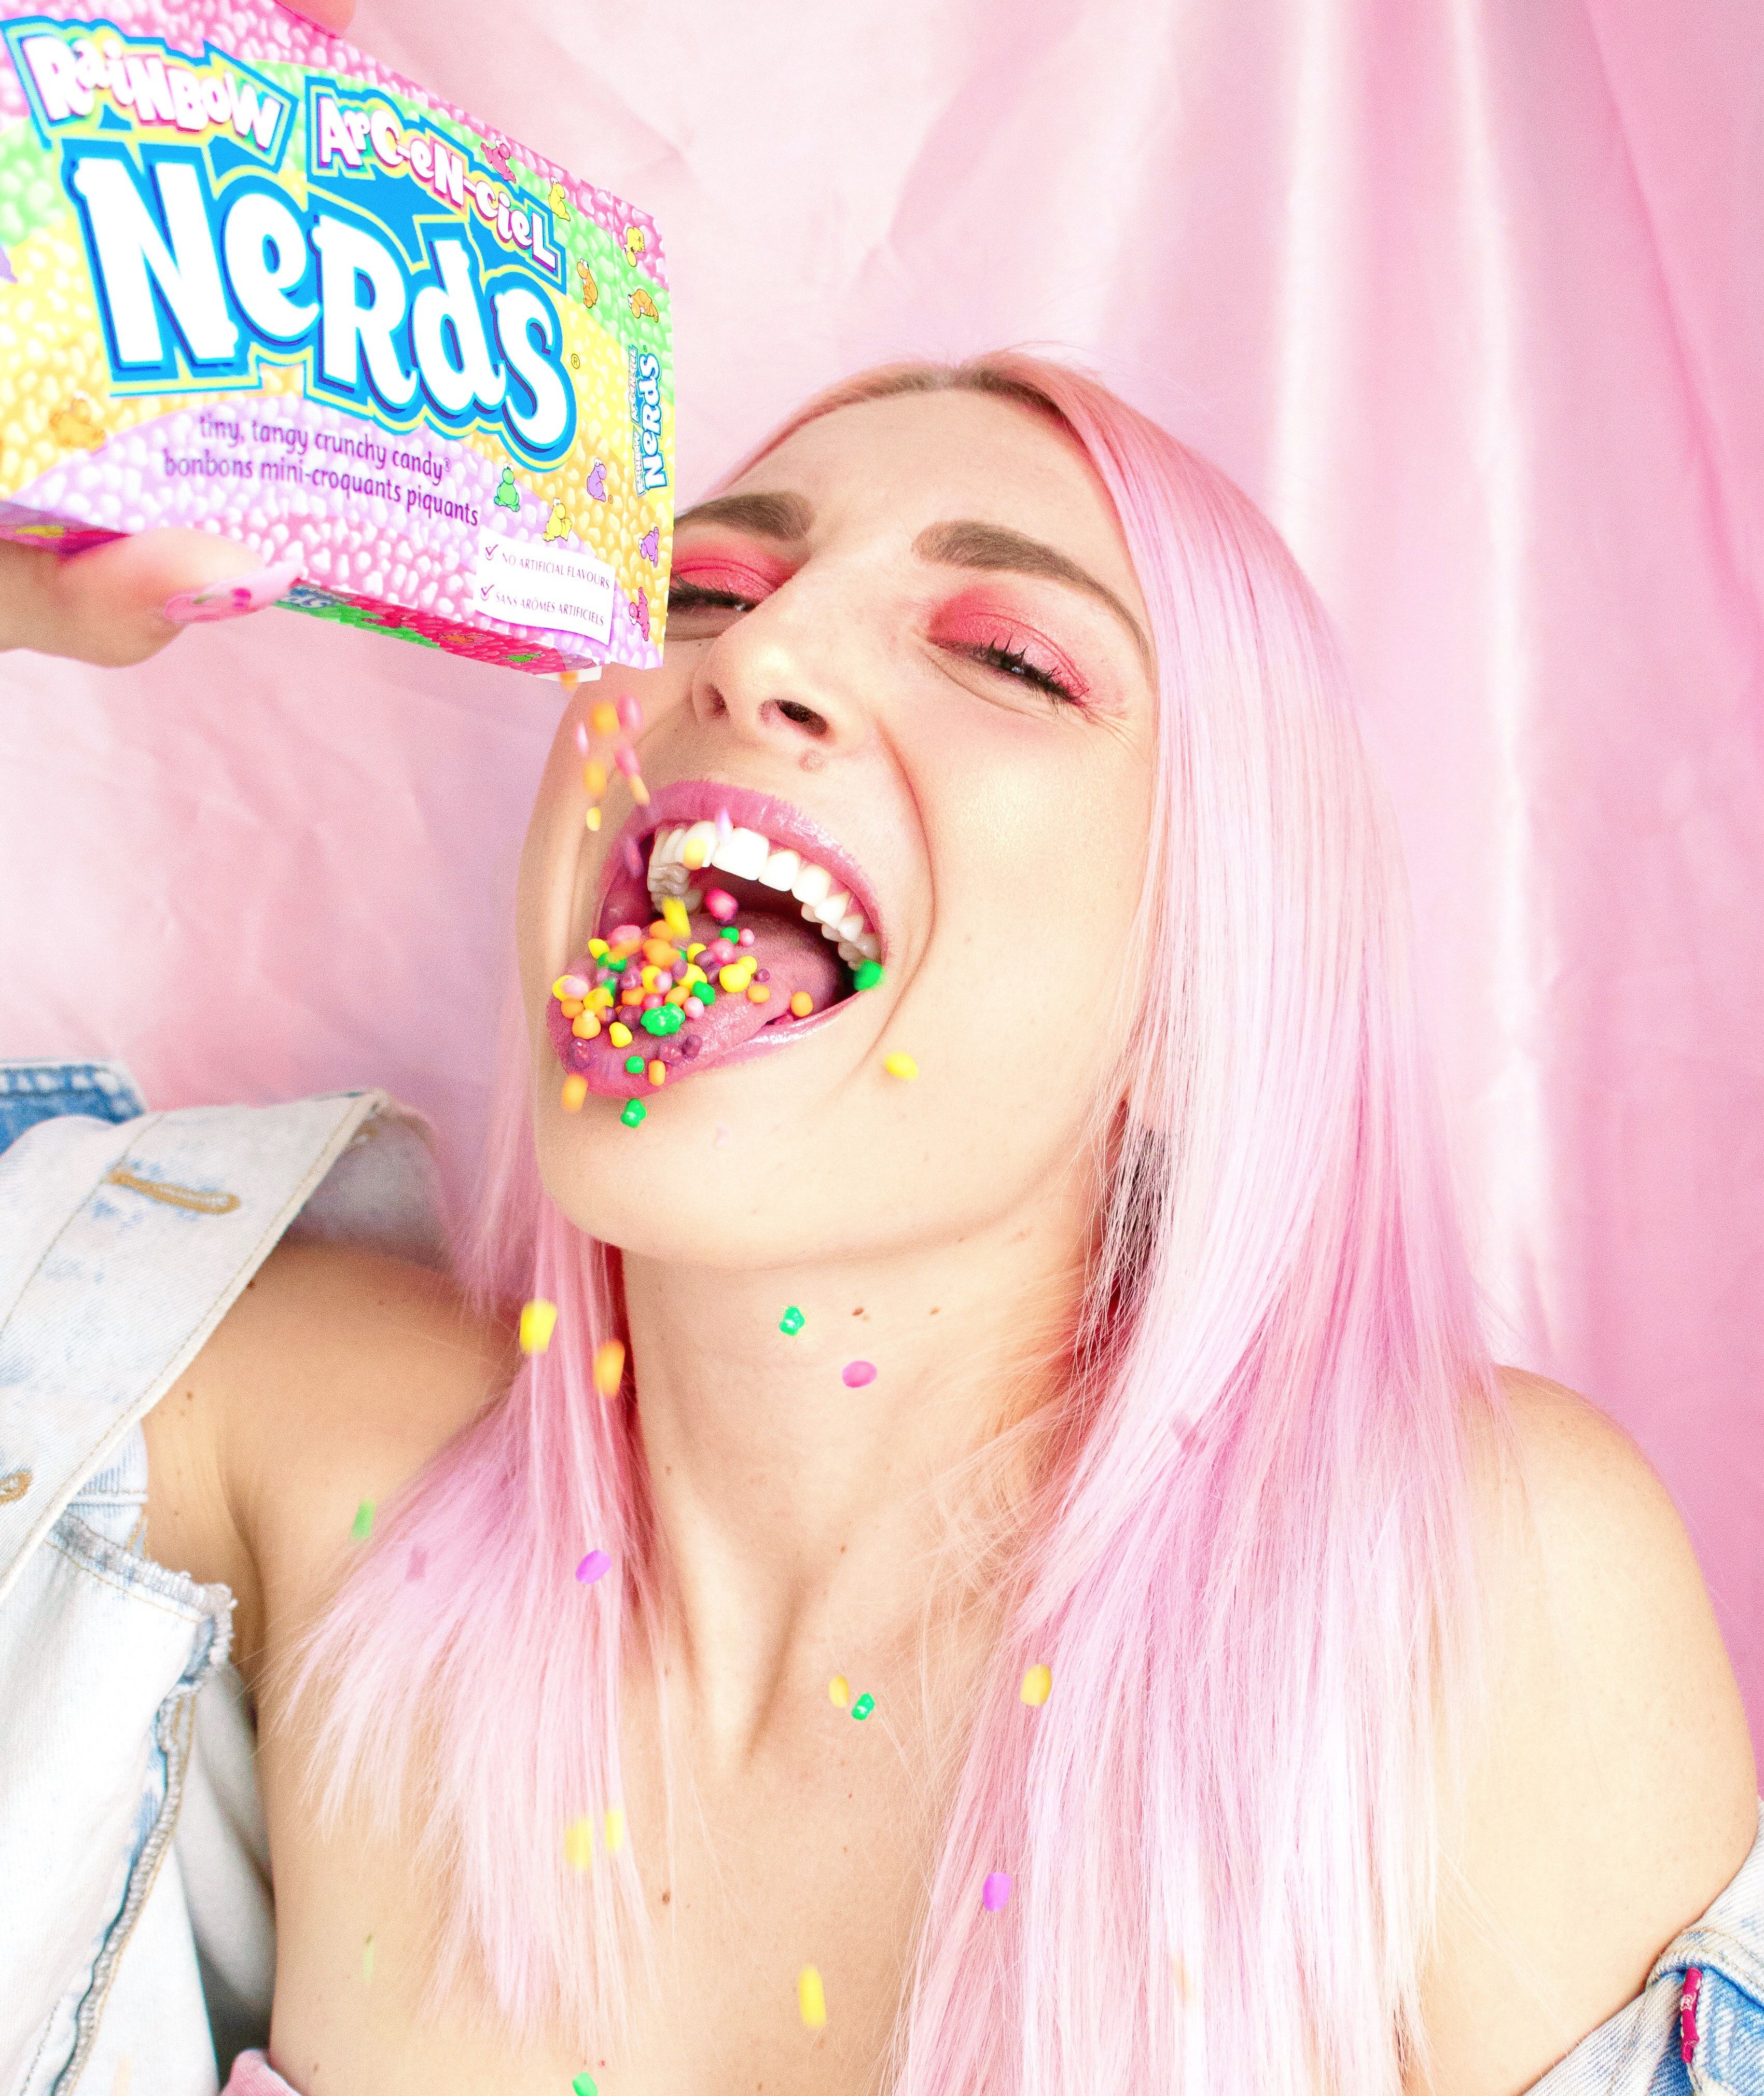 Woman With Pink Hair Pouring Nerds Candy in Her Mouth · Free Stock